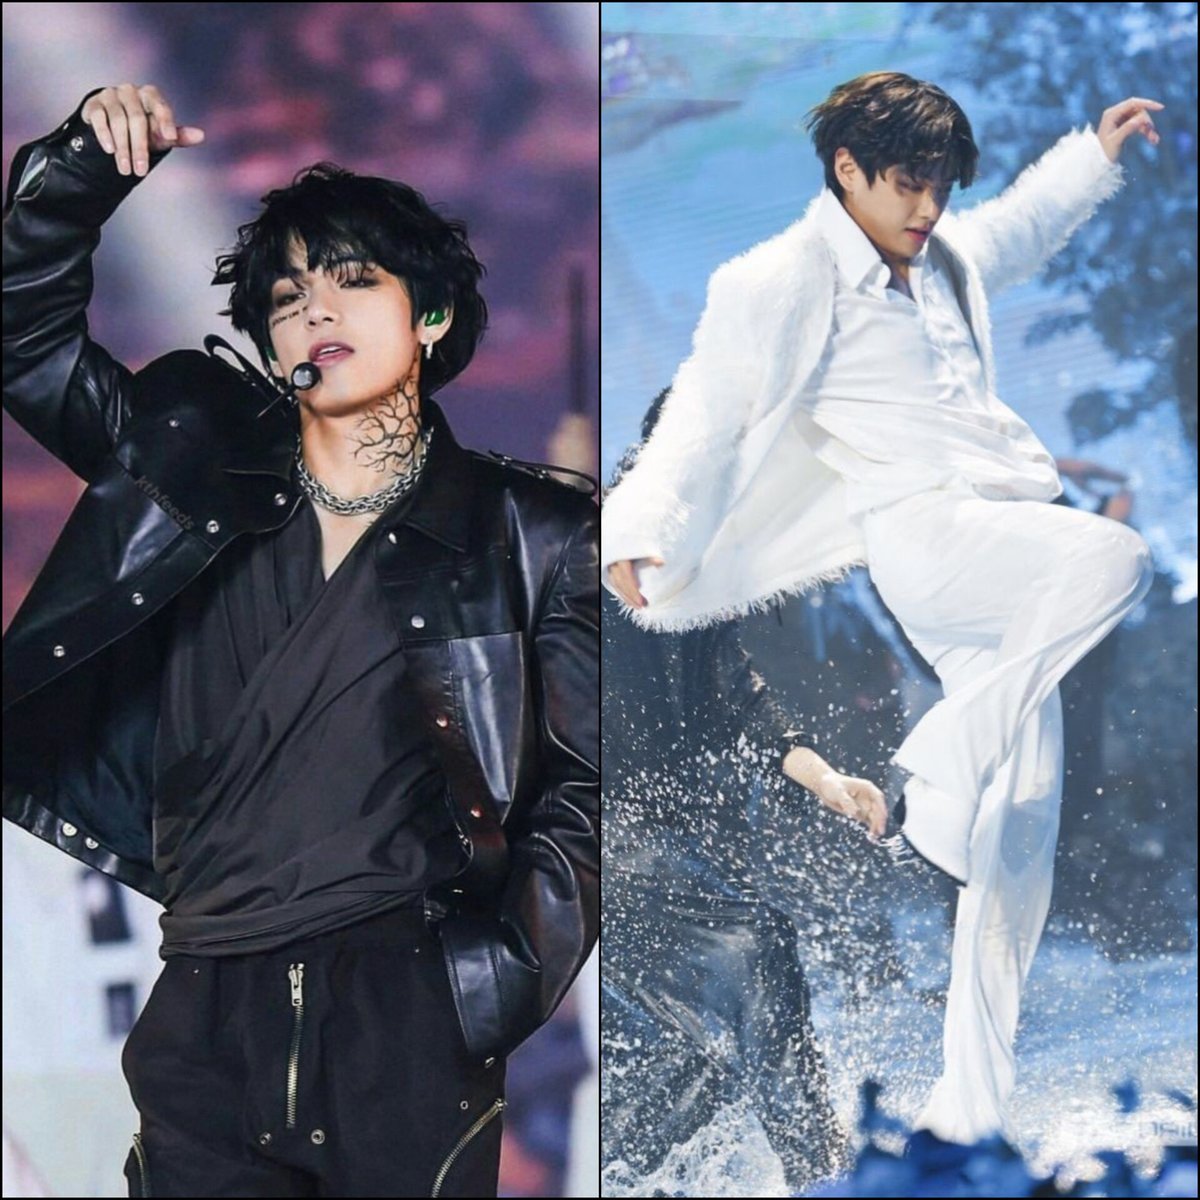 Dancer Taehyung eating up hardest choreography with ease 🔥

A Thread: